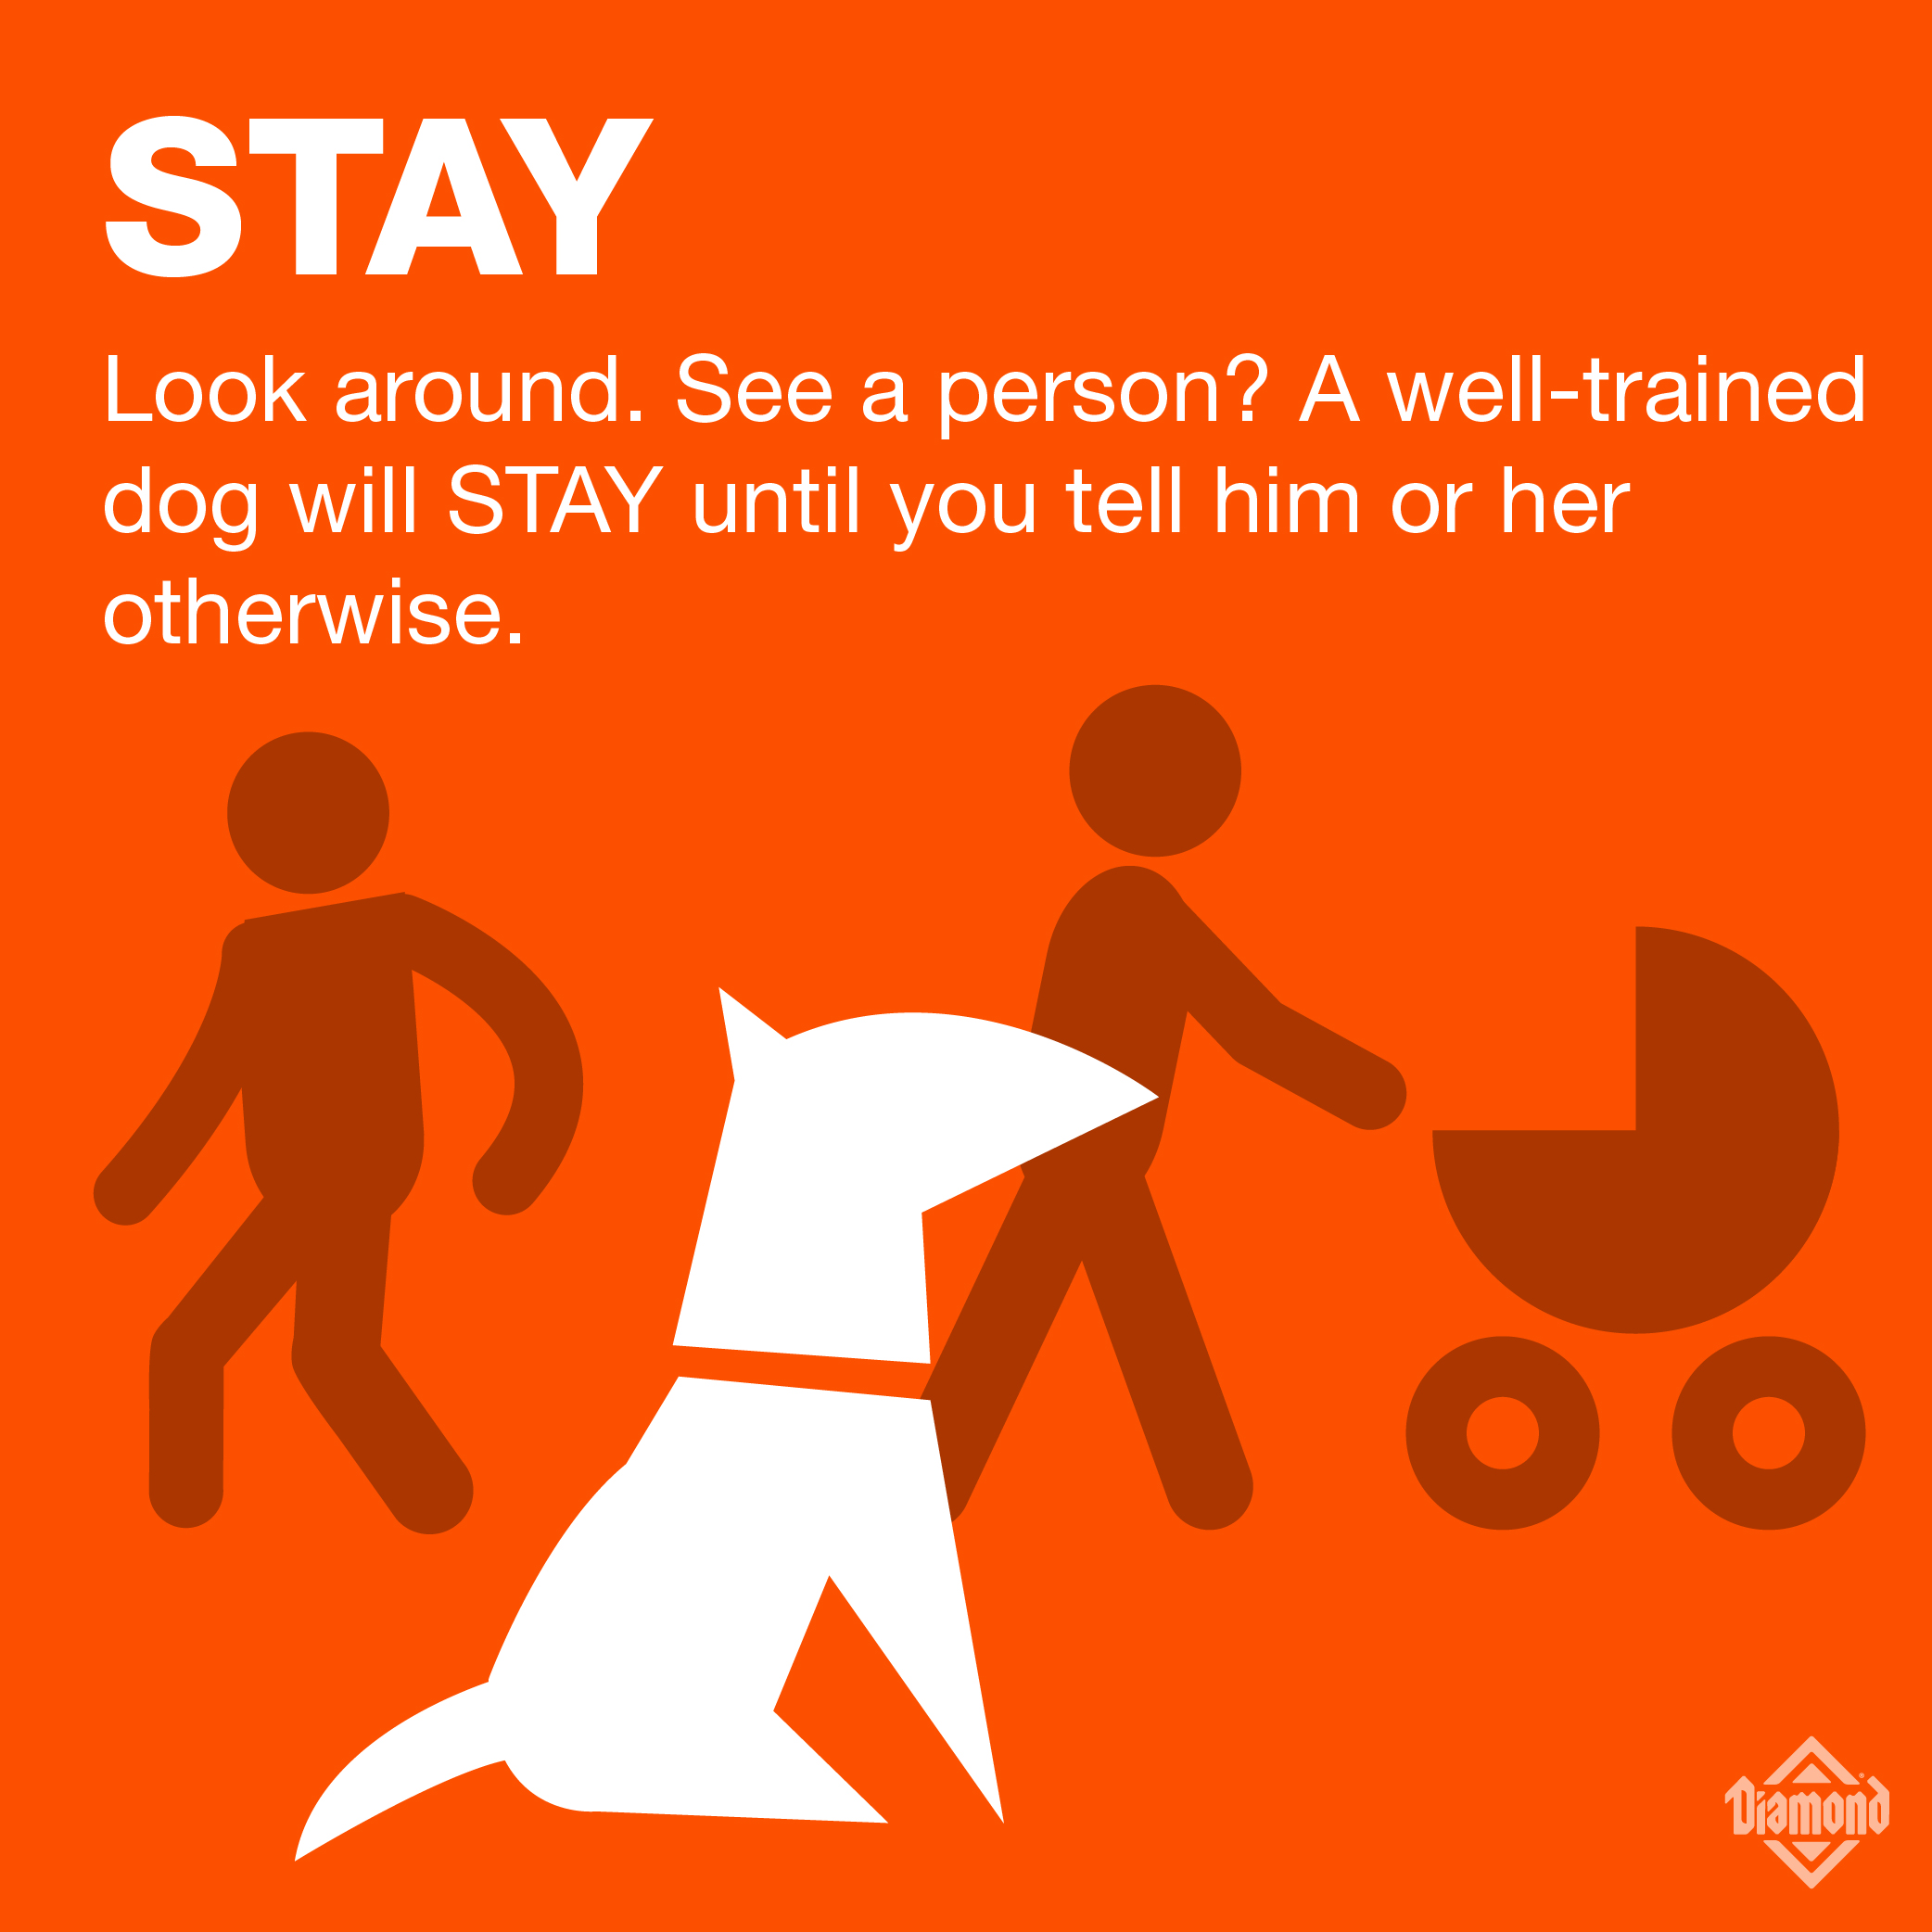 Stay: Look around. See a person? A well-trained dog will STAY until you tell him or her otherwise. | A graphic of a dog sitting in the middle of a crowd | Diamond Pet Food